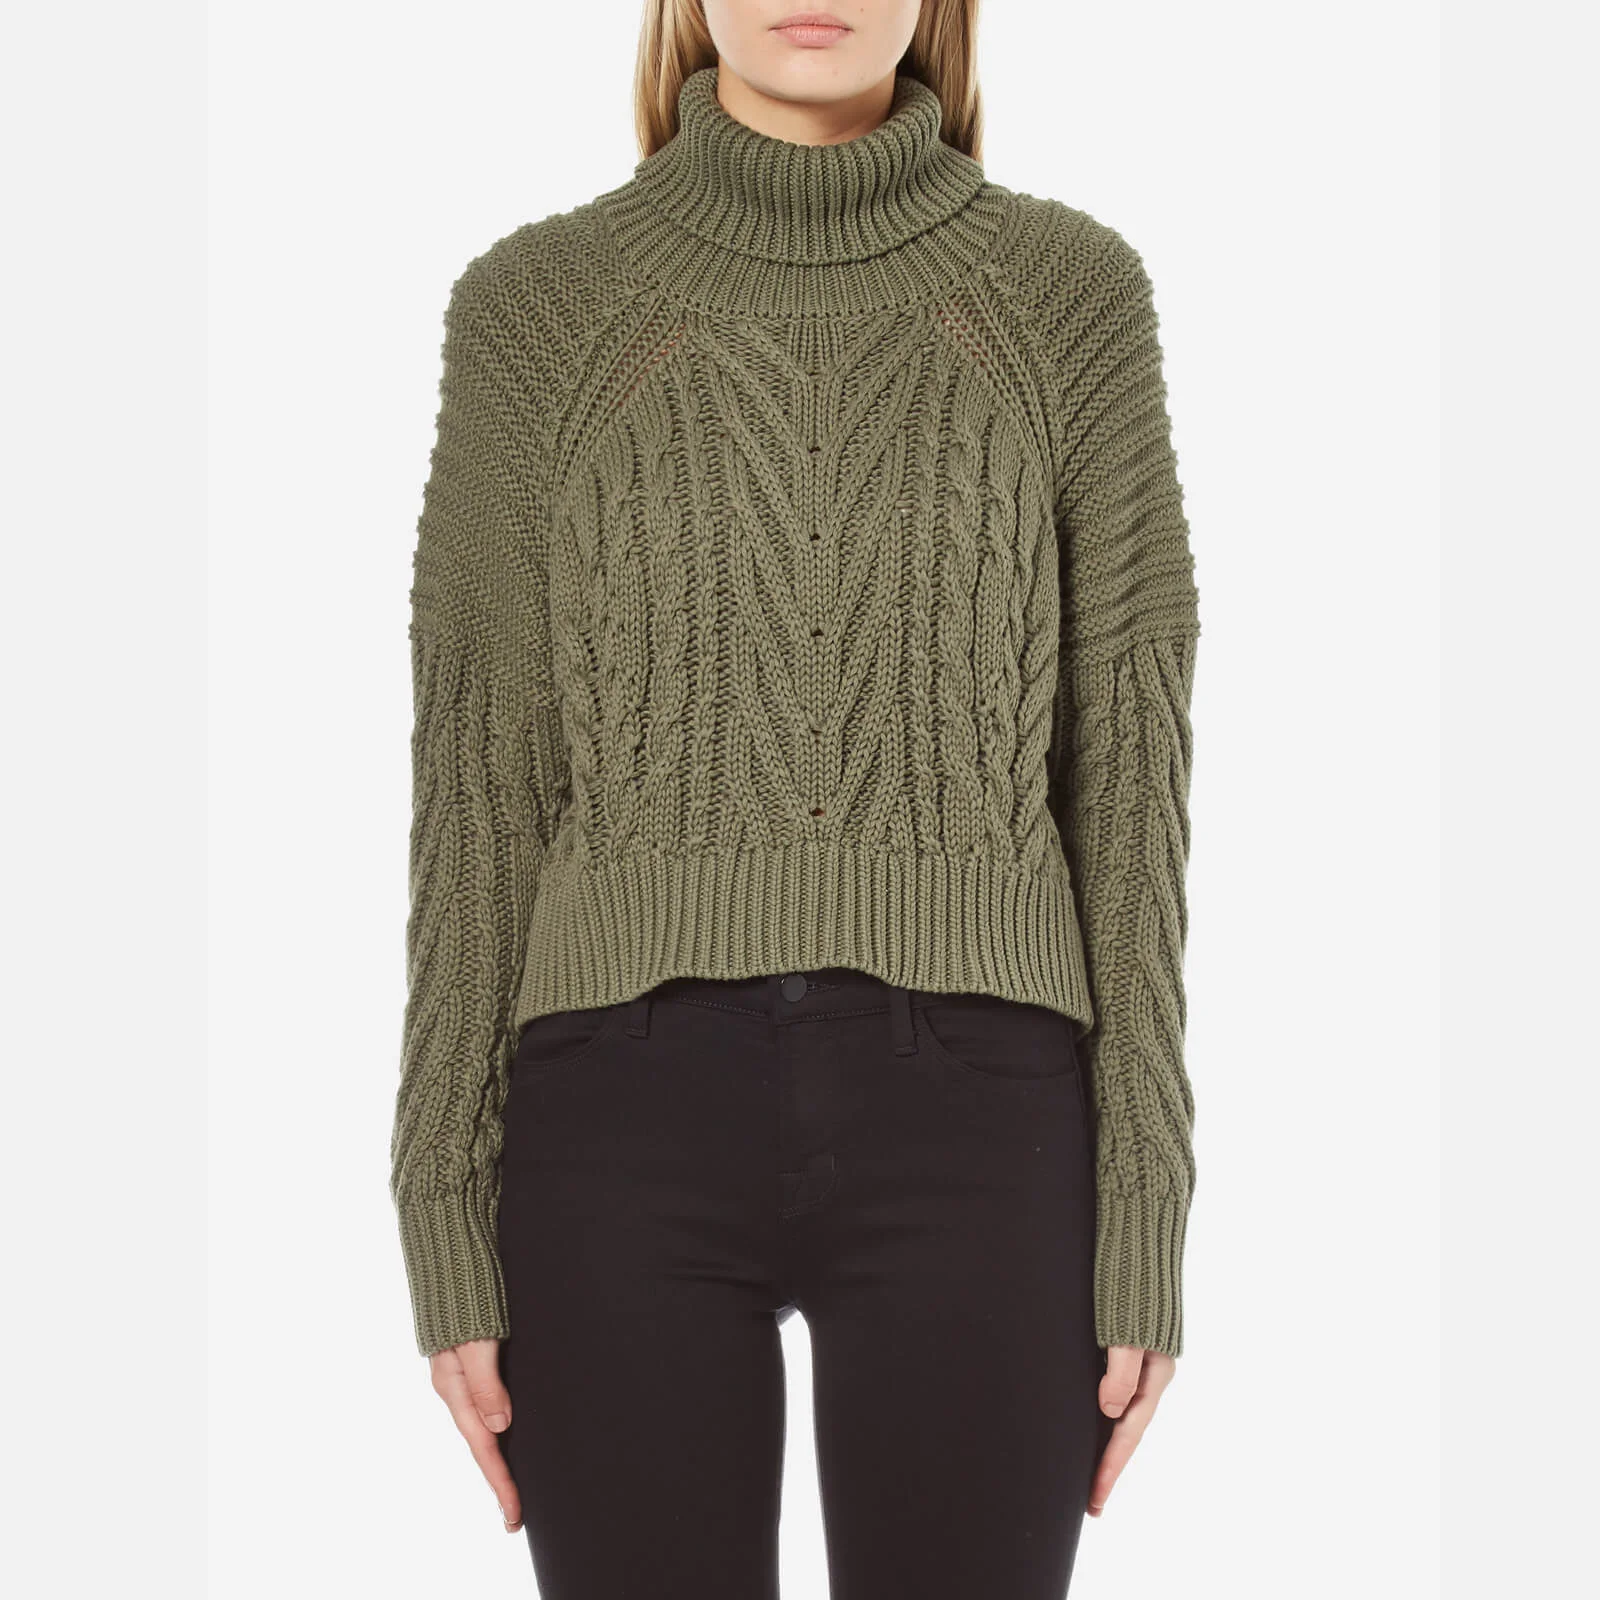 C/MEO COLLECTIVE Women's Two Can Win Jumper - Khaki Image 1